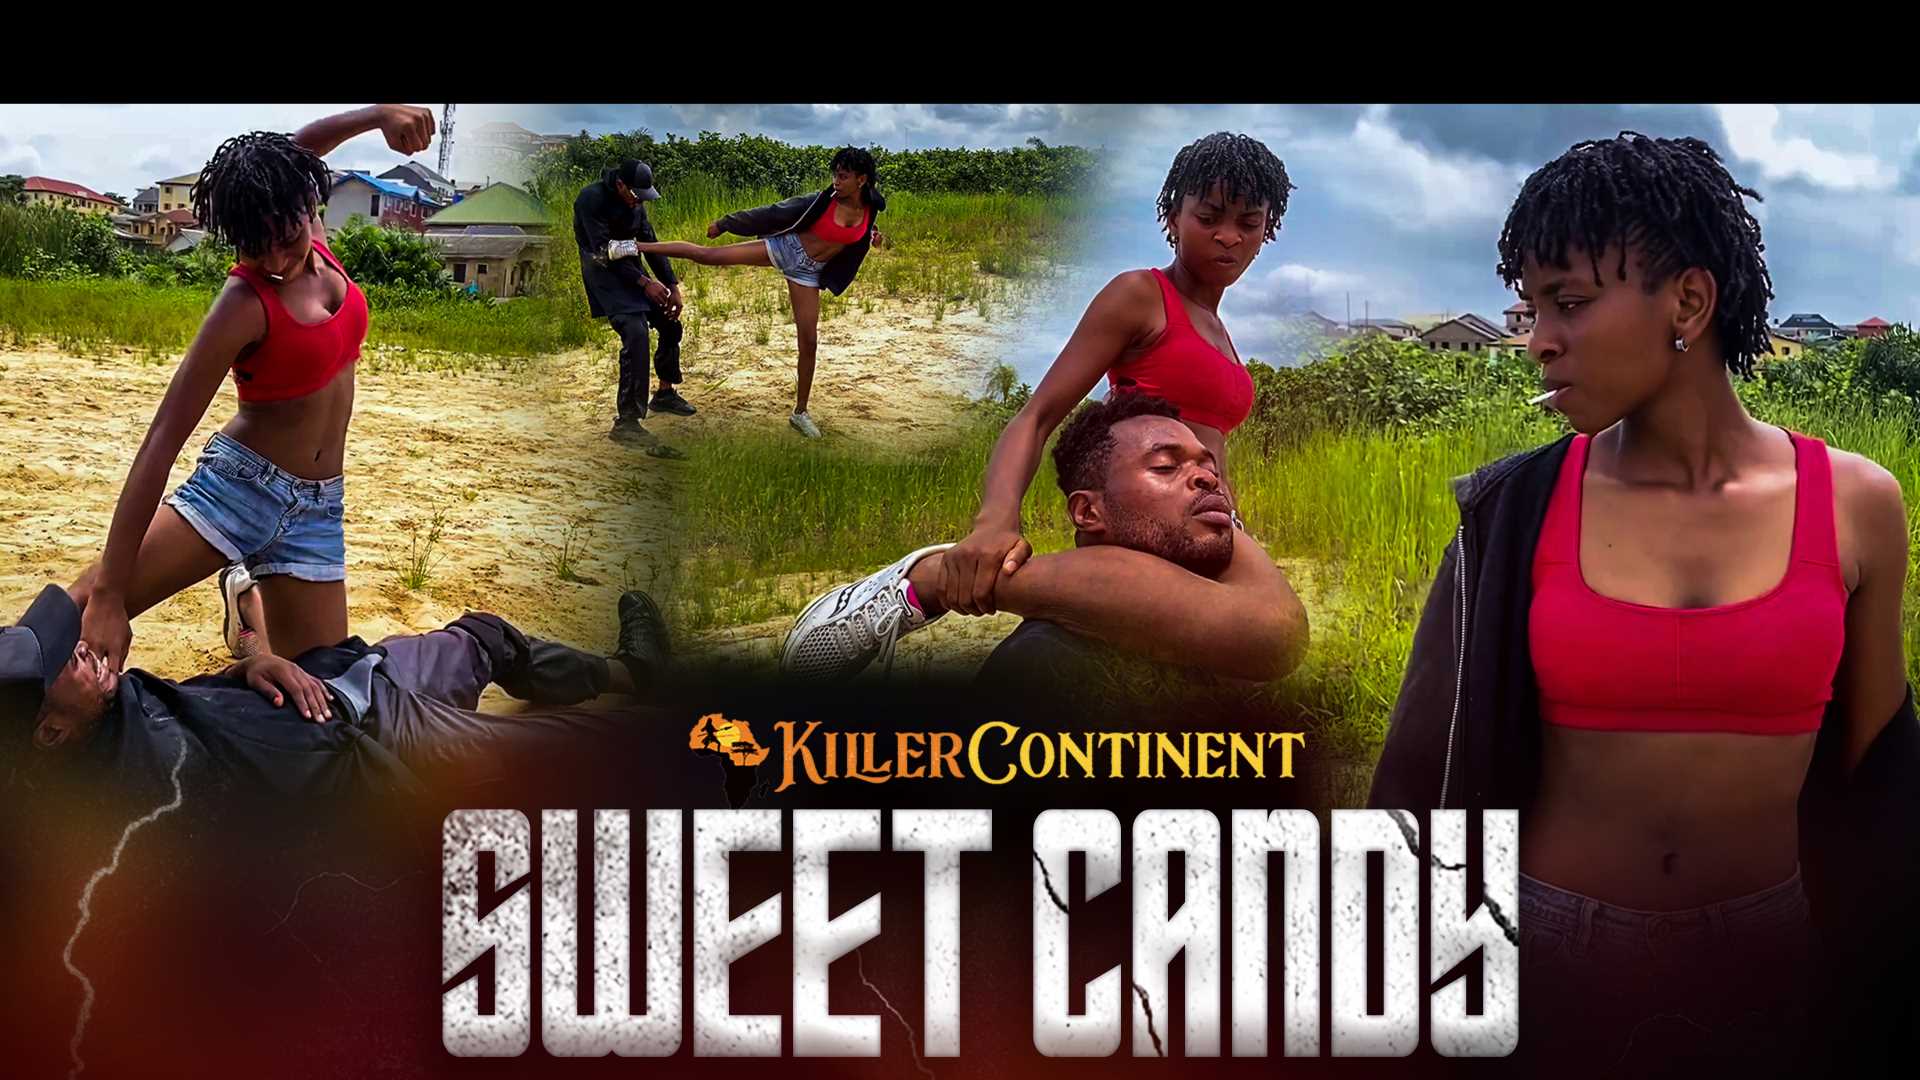 #9 - Sweet Candy